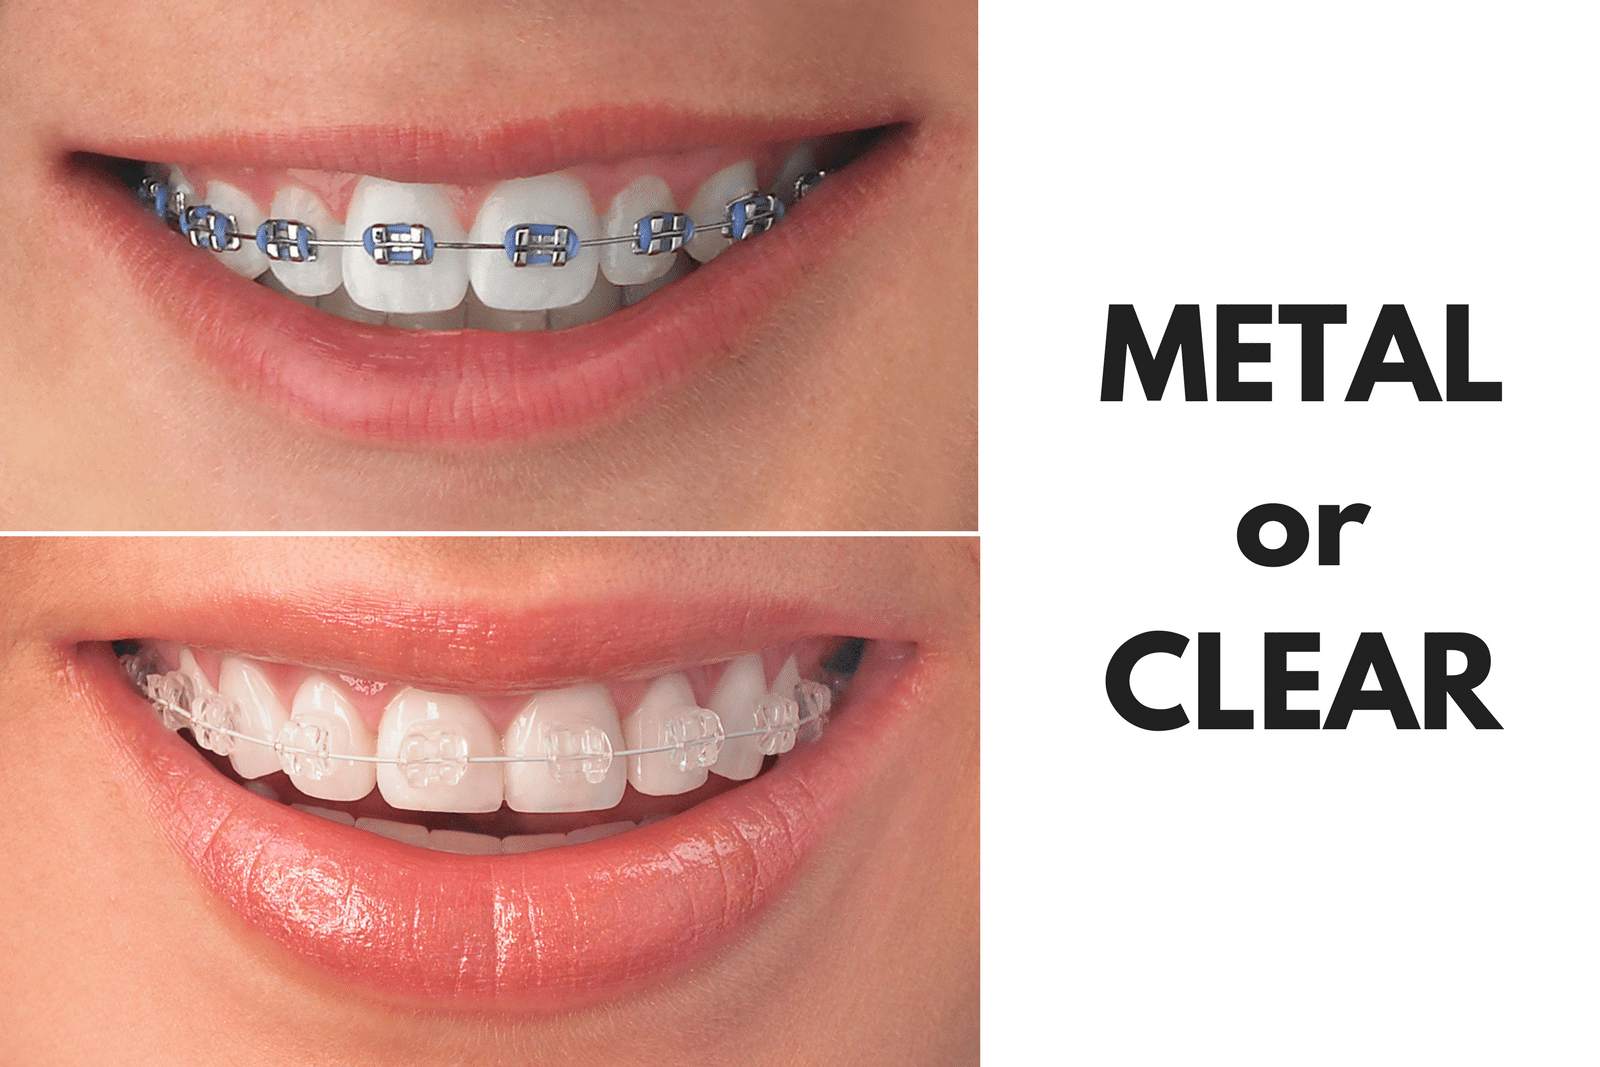 Ask Your Corpus Christi Dentist: Should I Get Metal or Clear Braces?